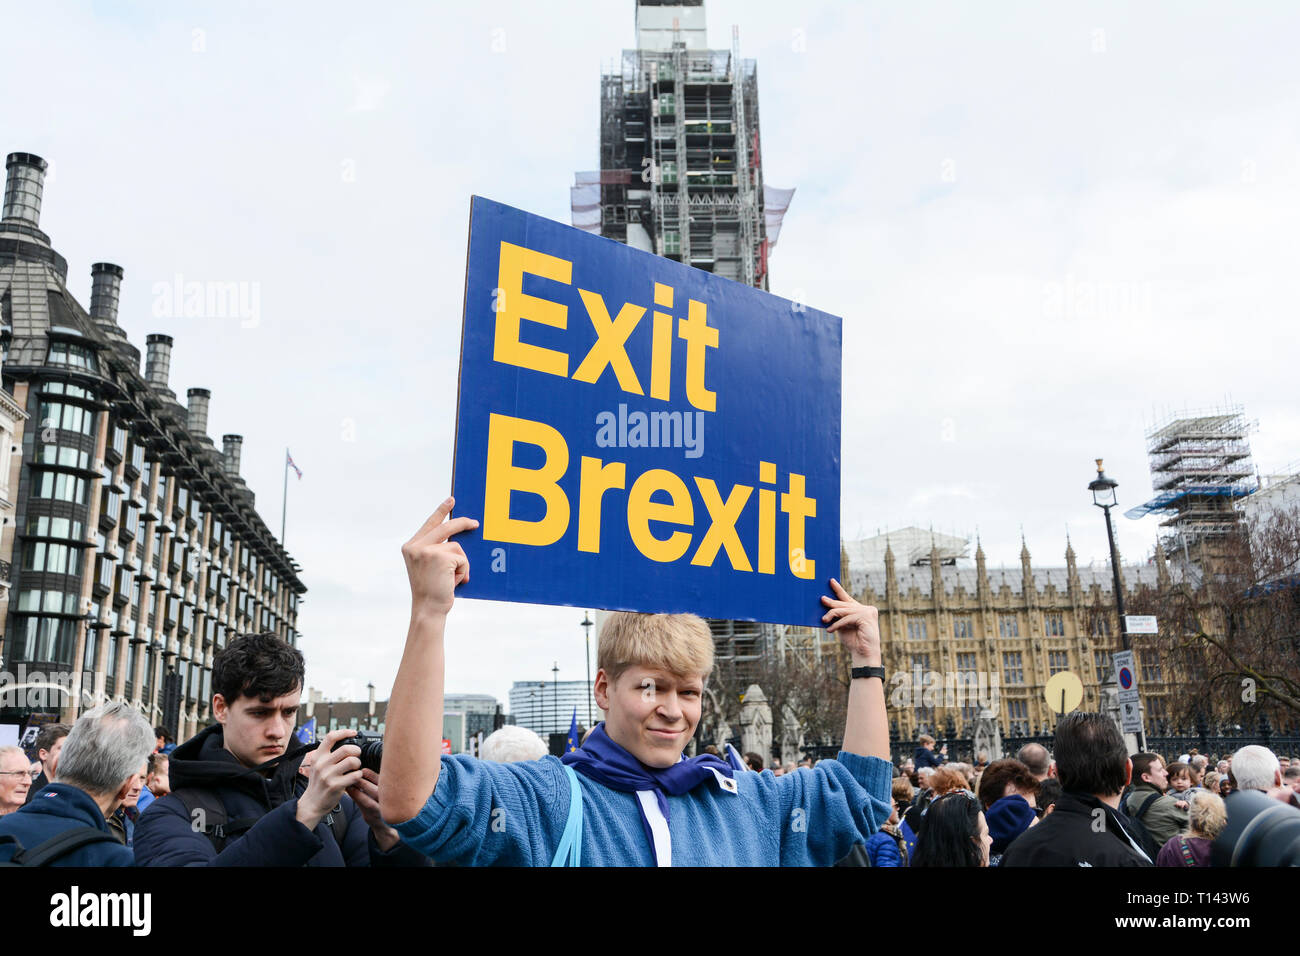 London, England, UK. 23 March 2019.  Brexit March People's Vote protest march © Benjamin John/ Alamy Live News. Stock Photo